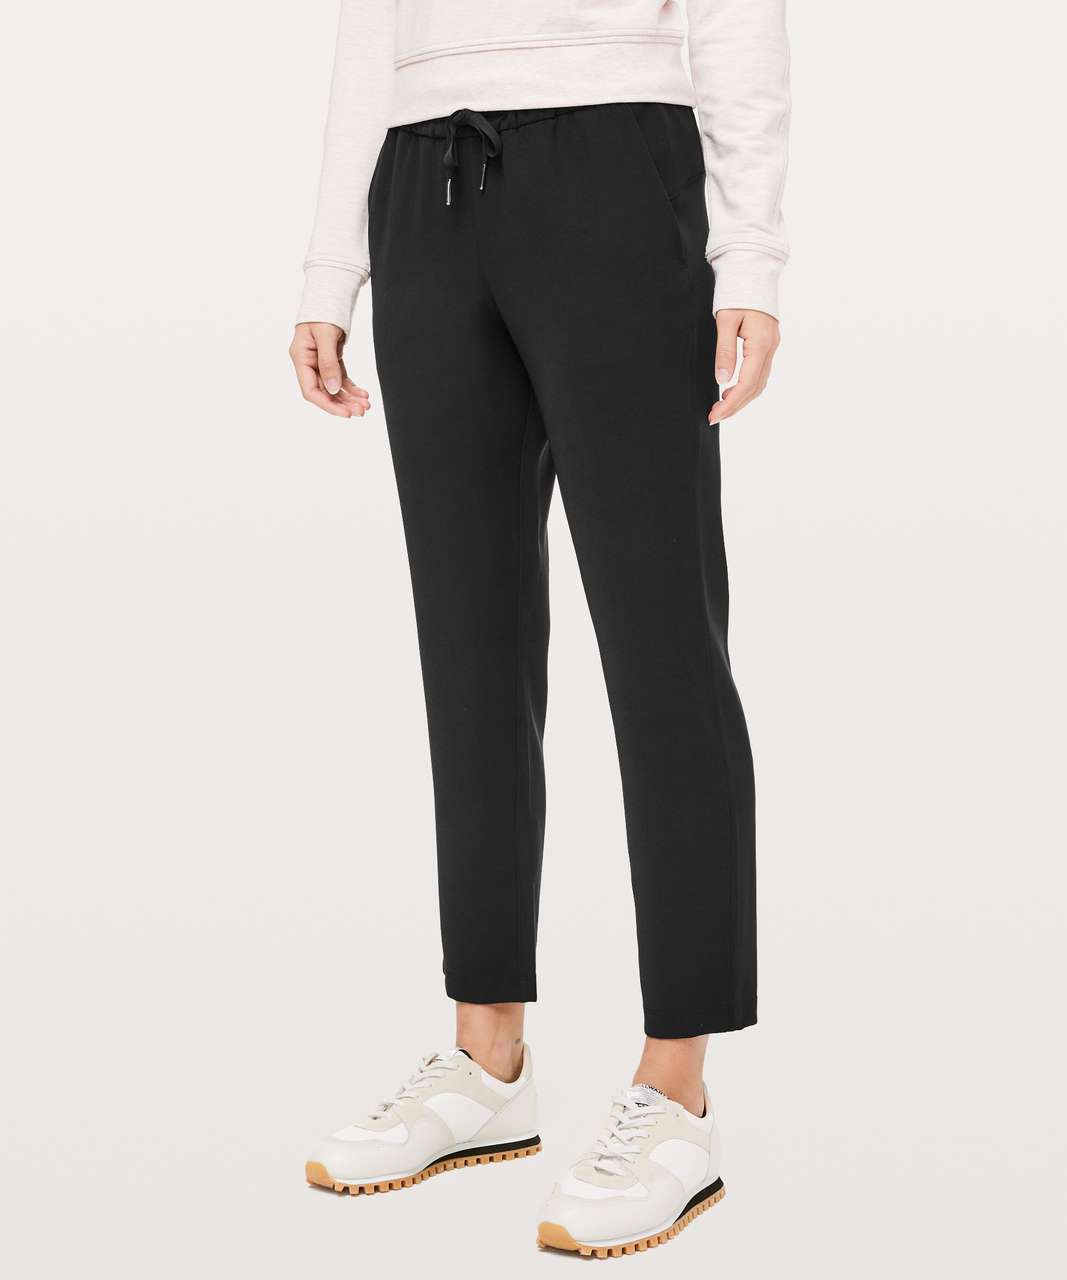 lululemon on the fly pant woven